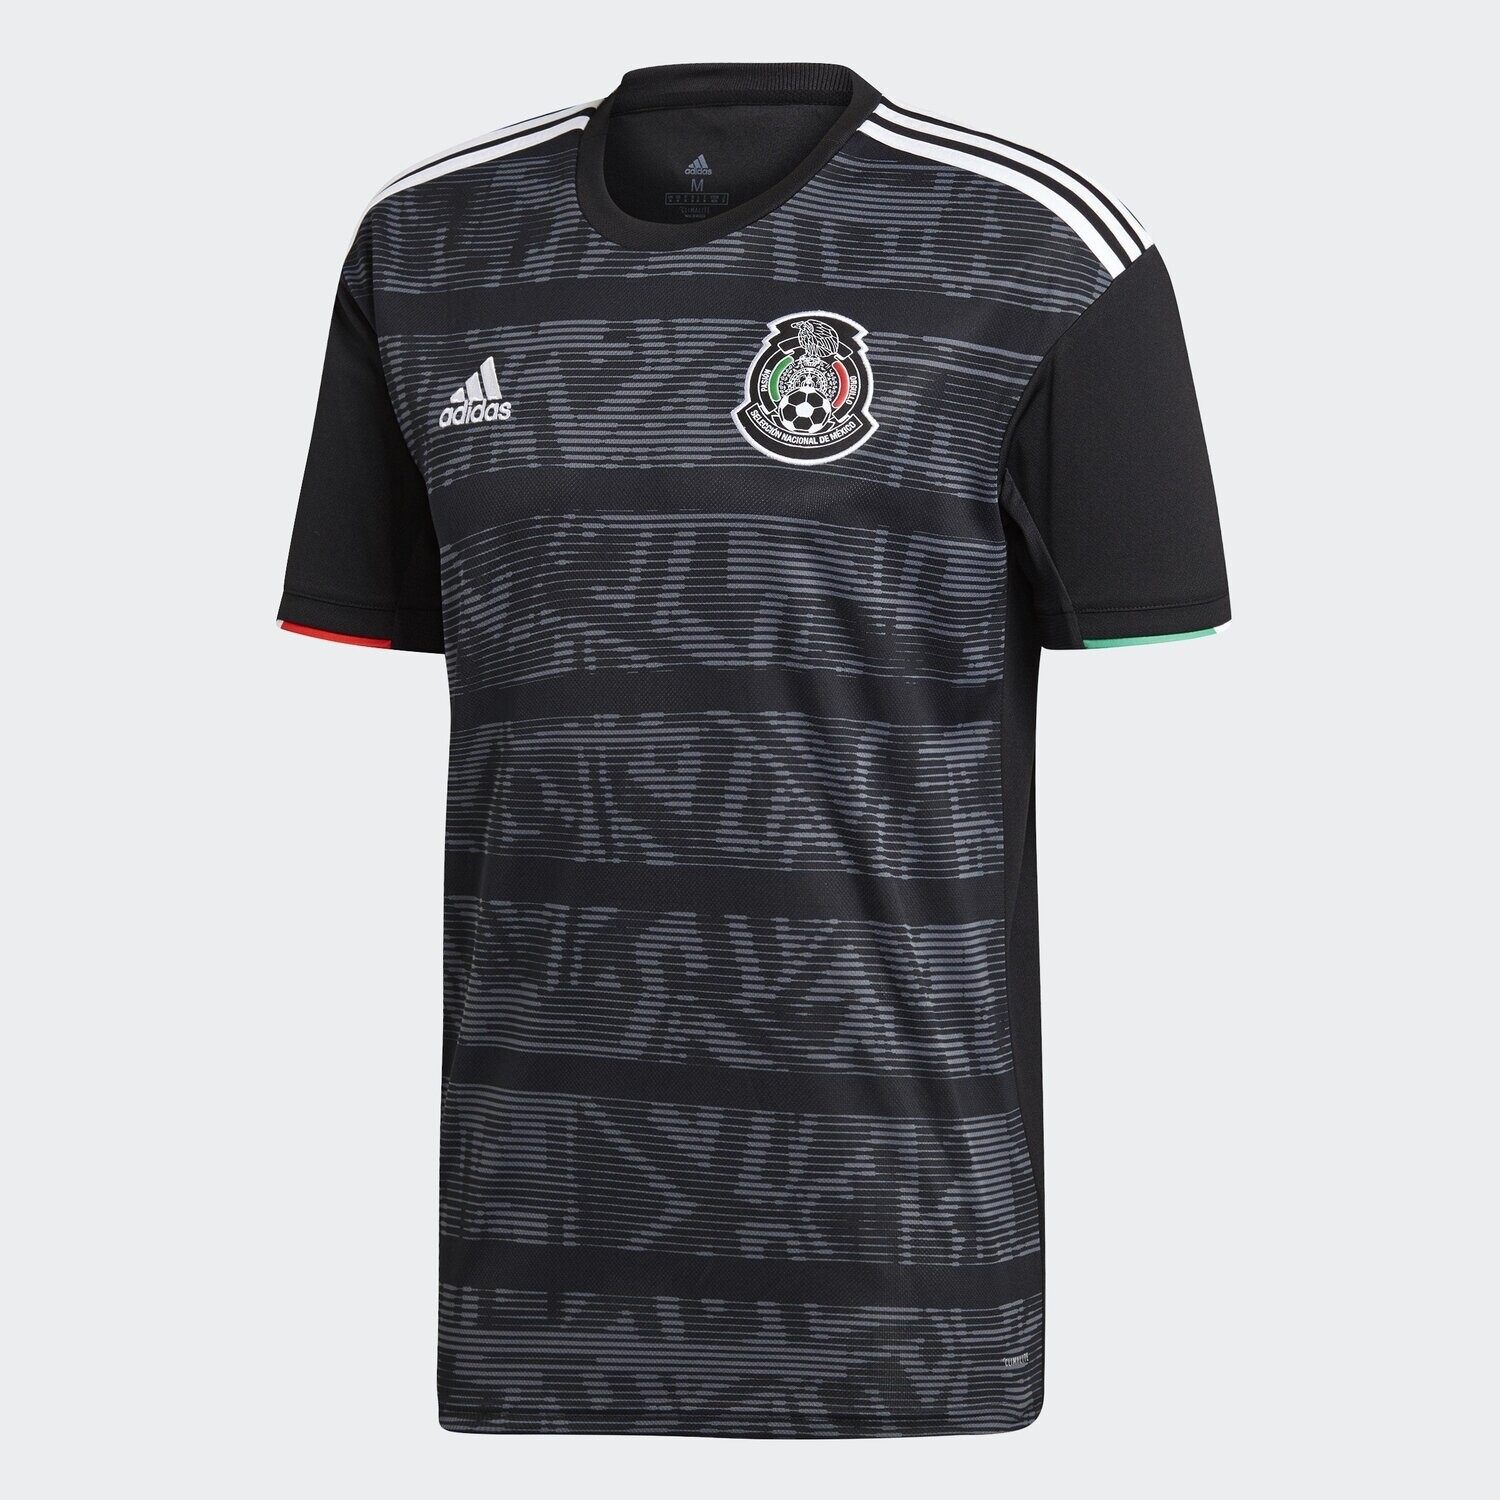 Adidas Mexico Official Home Jersey Shirt 2019